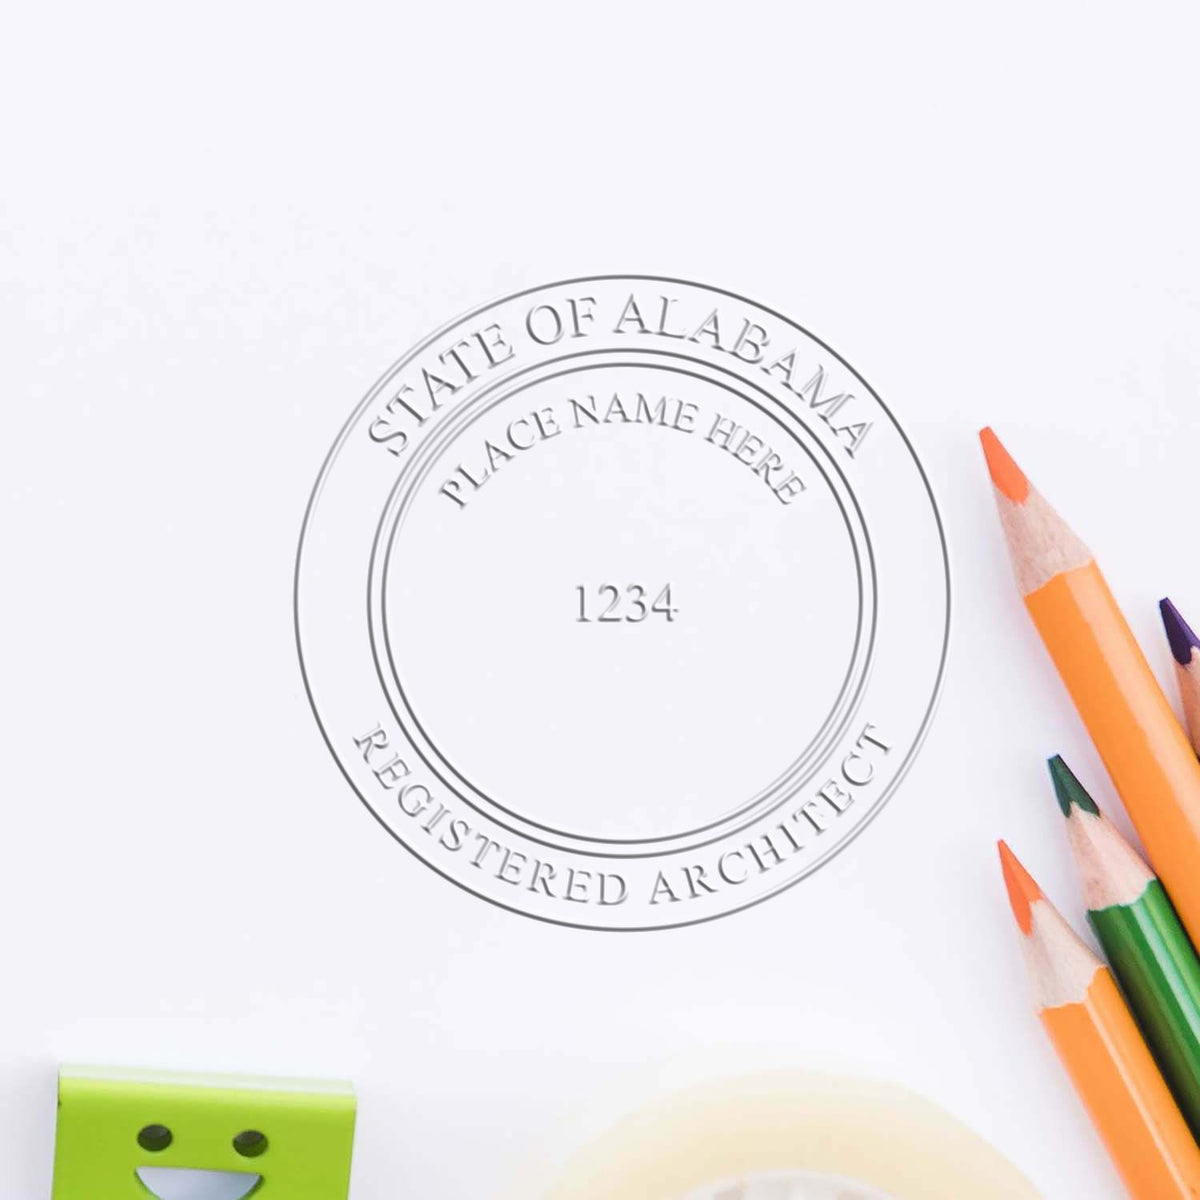 A stamped impression of the Alabama Desk Architect Embossing Seal in this stylish lifestyle photo, setting the tone for a unique and personalized product.